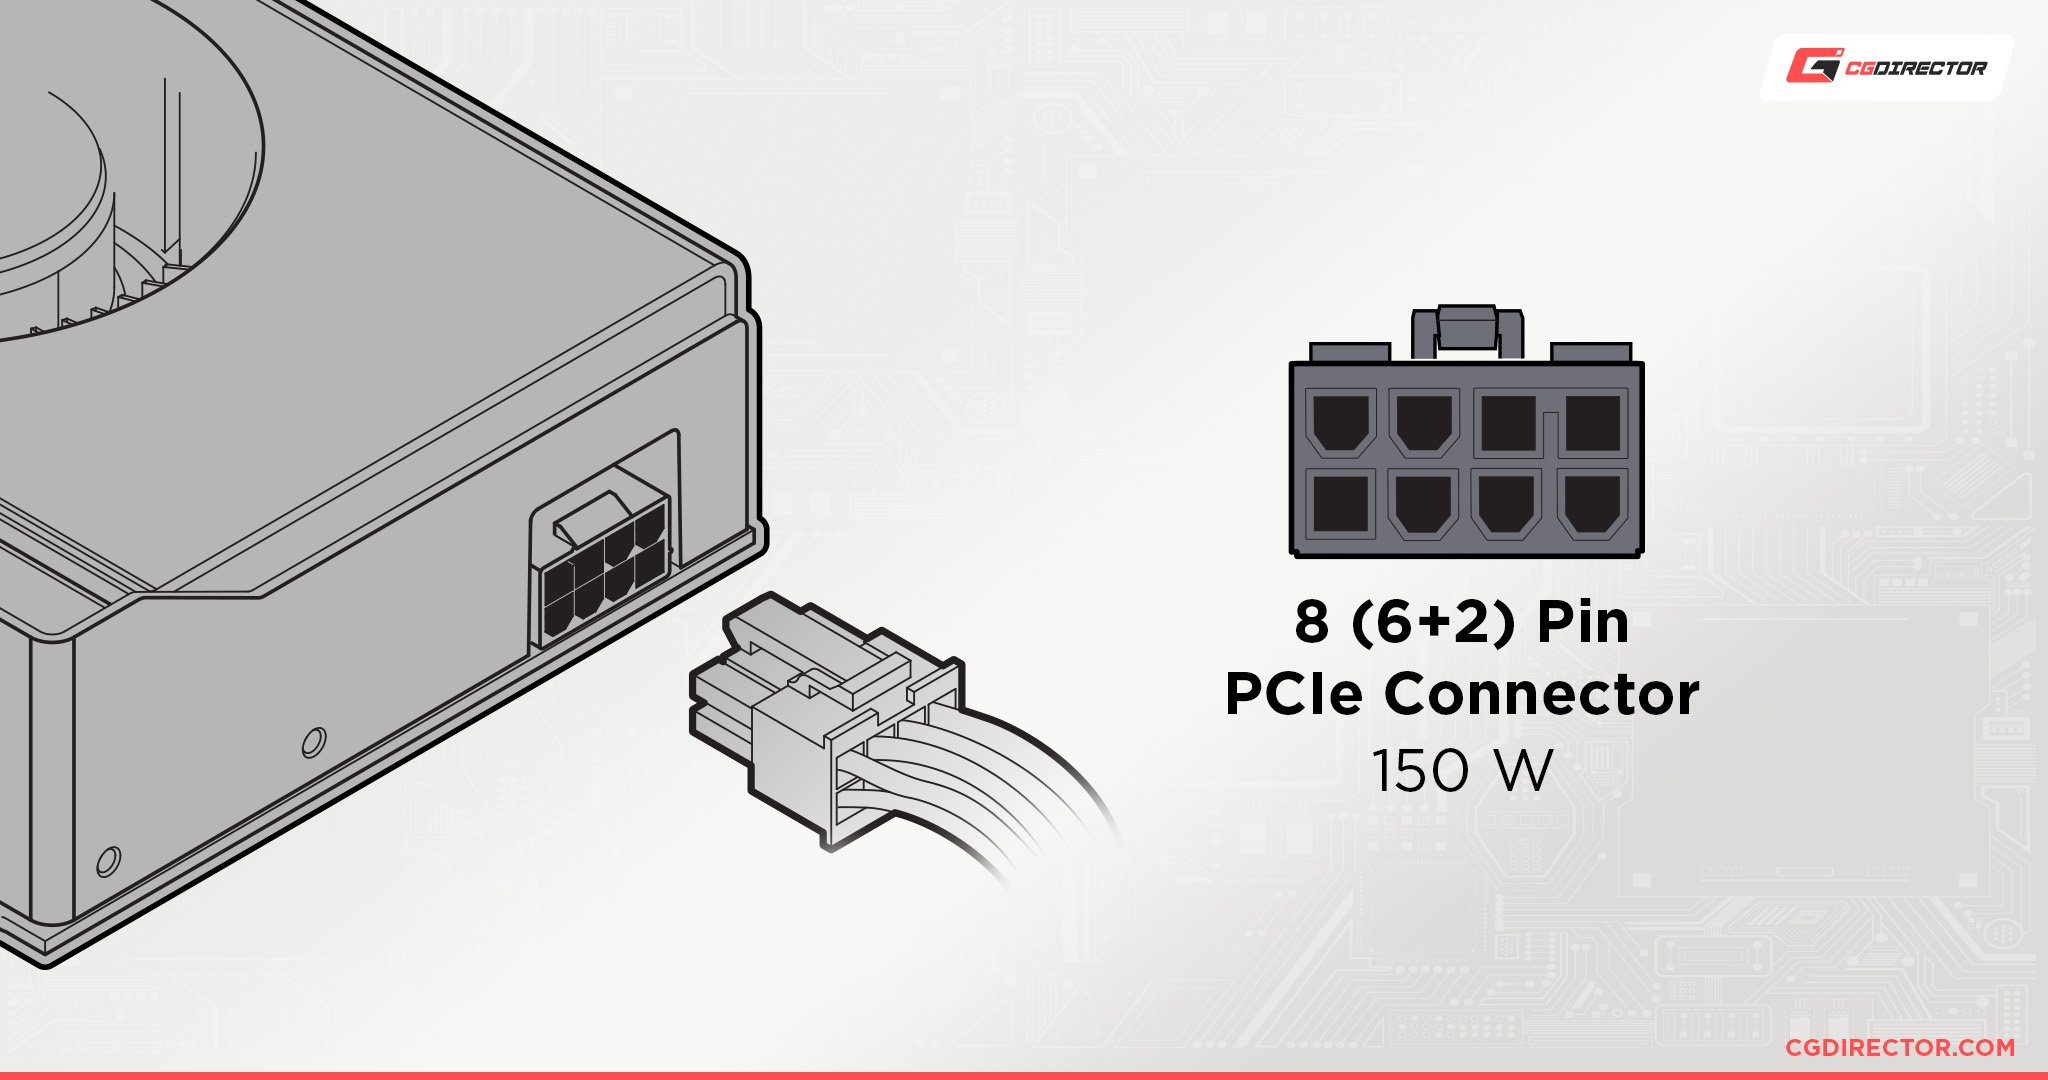 Power Supply Connectors Guide - Types of PC Power Connectors